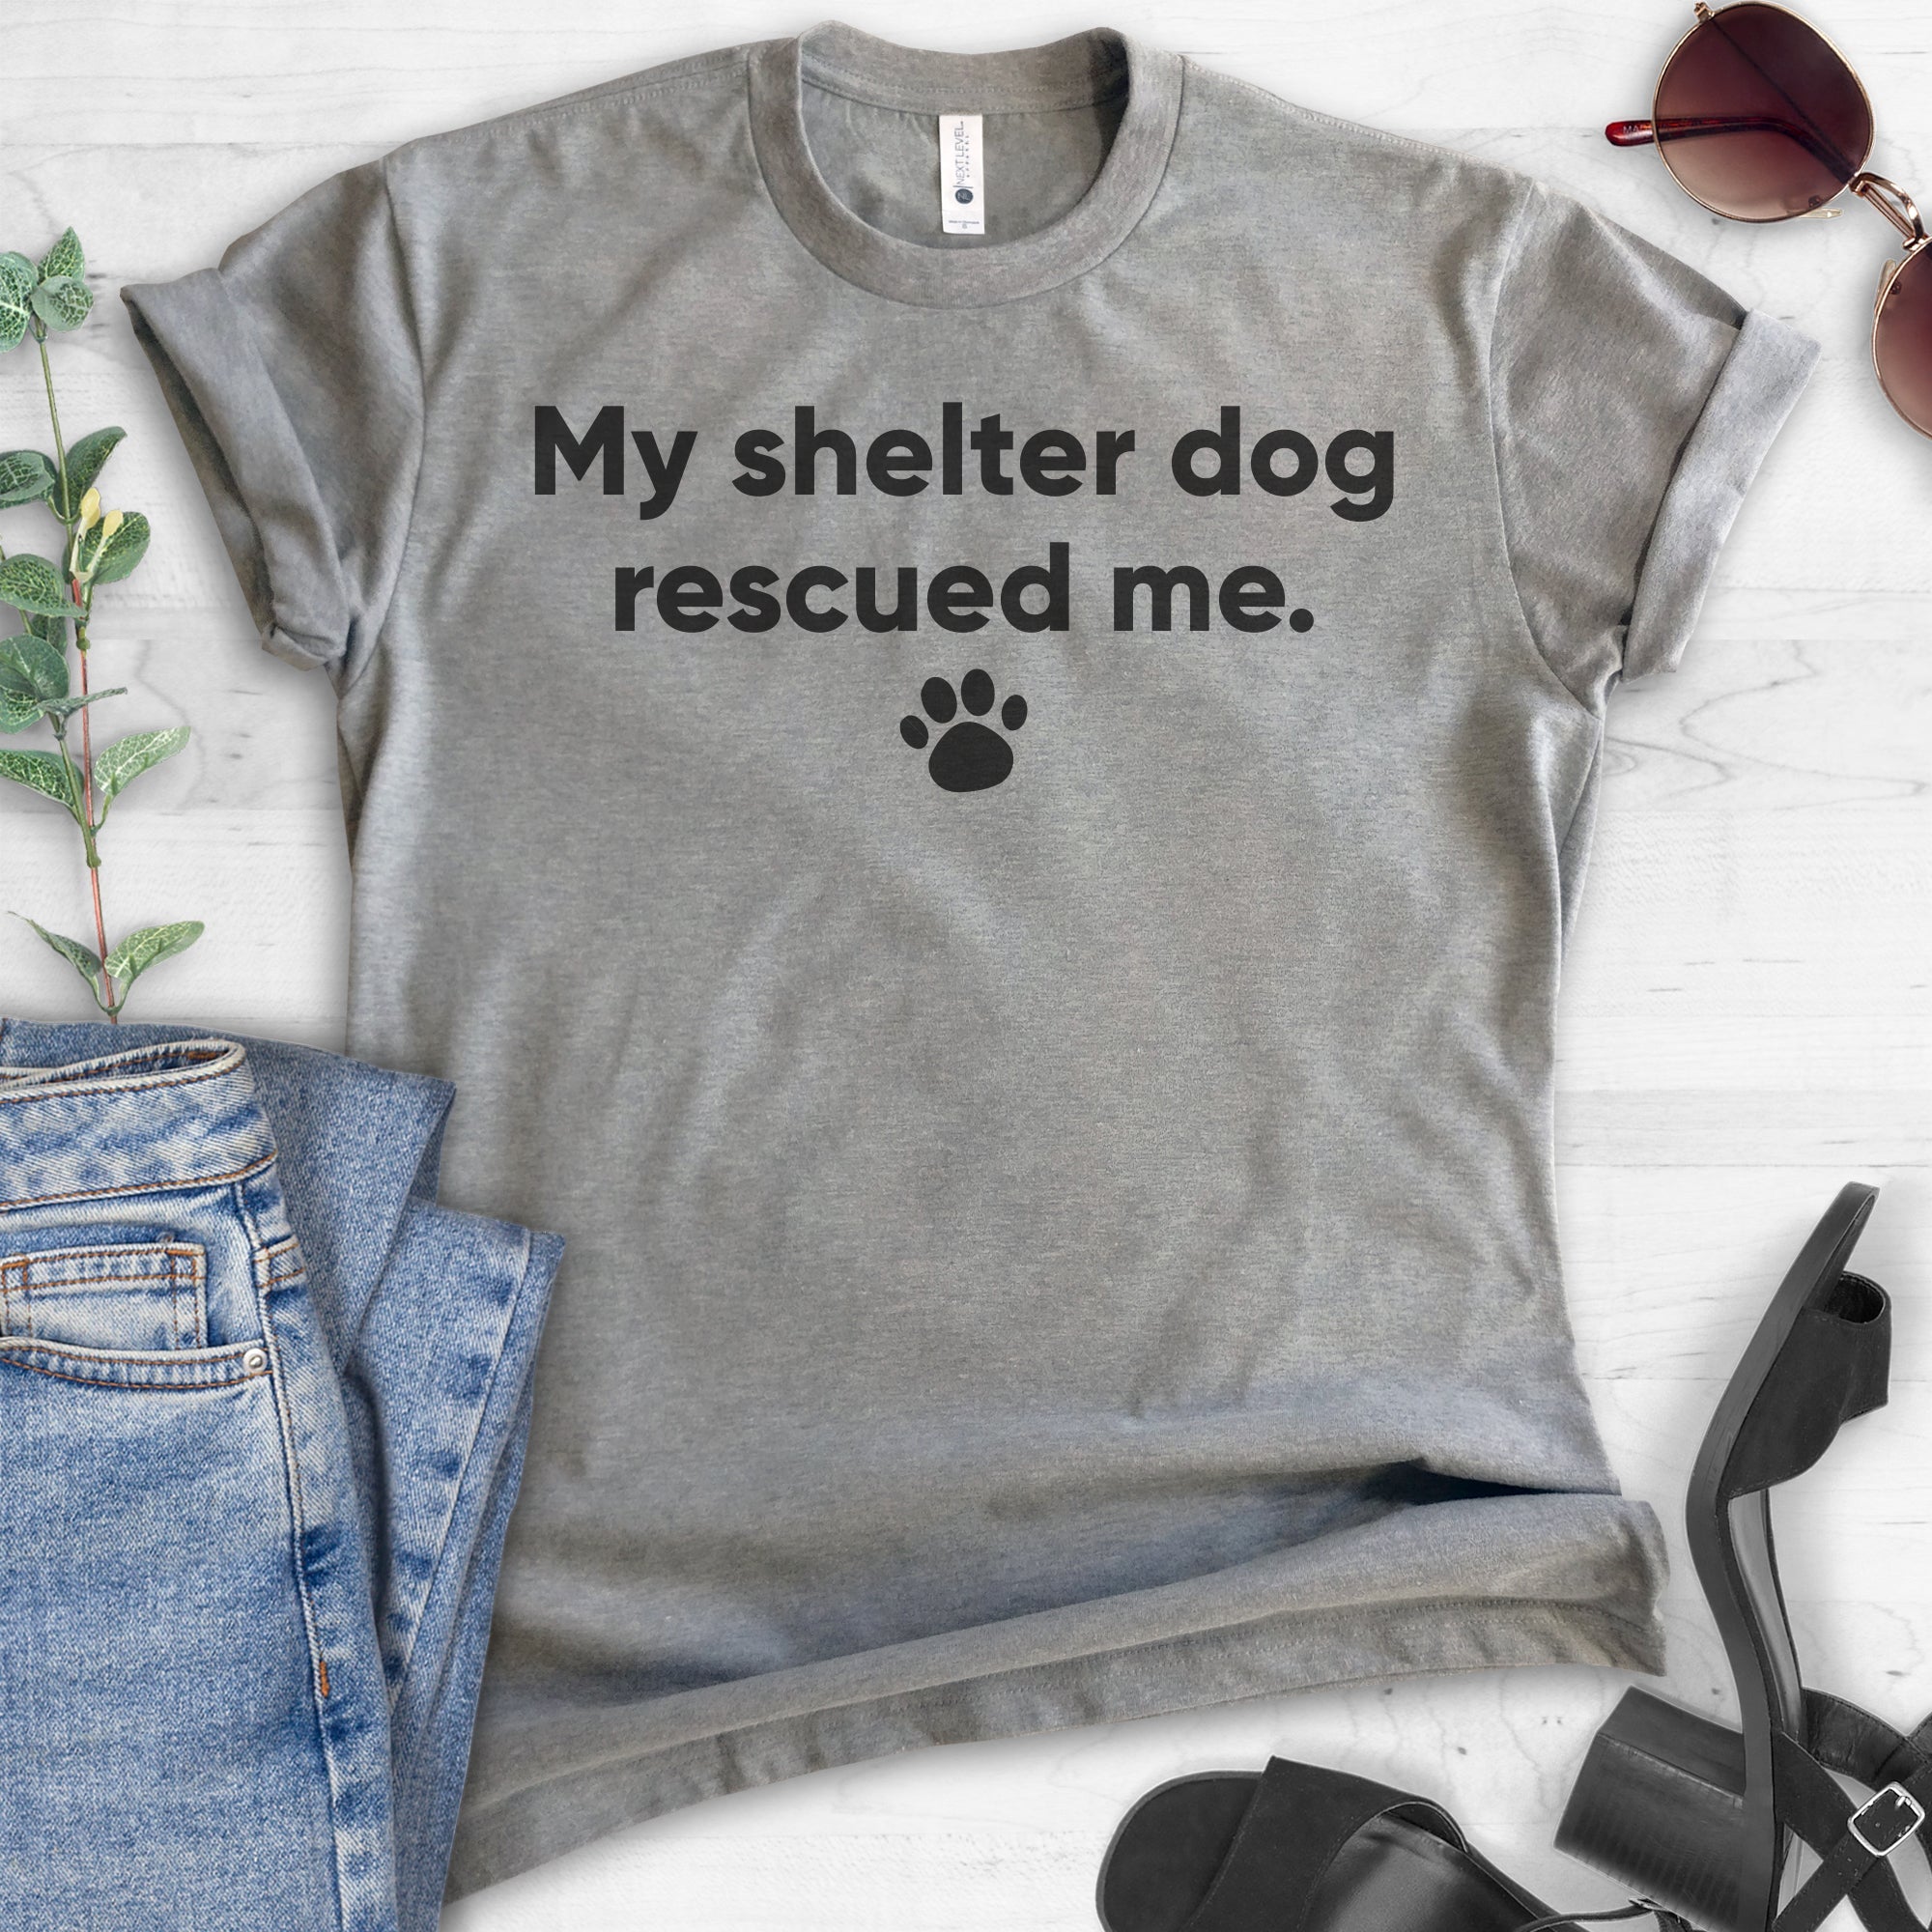 My Shelter Dog Rescued Me T-shirt